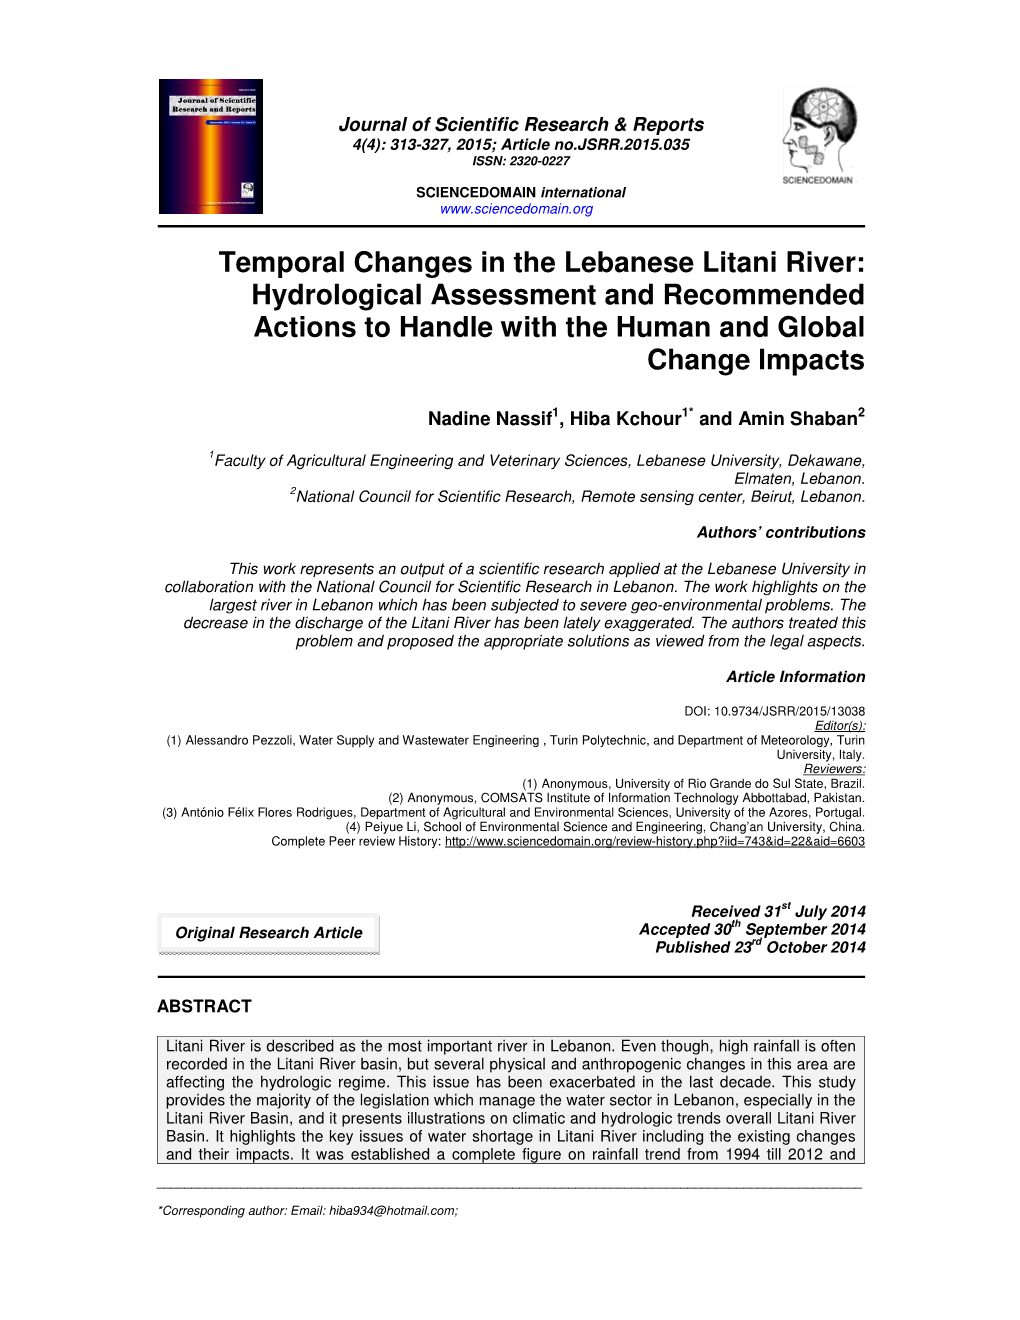 Temporal Changes in the Lebanese Litani River: Hydrological Assessment and Recommended Actions to Handle with the Human and Global Change Impacts